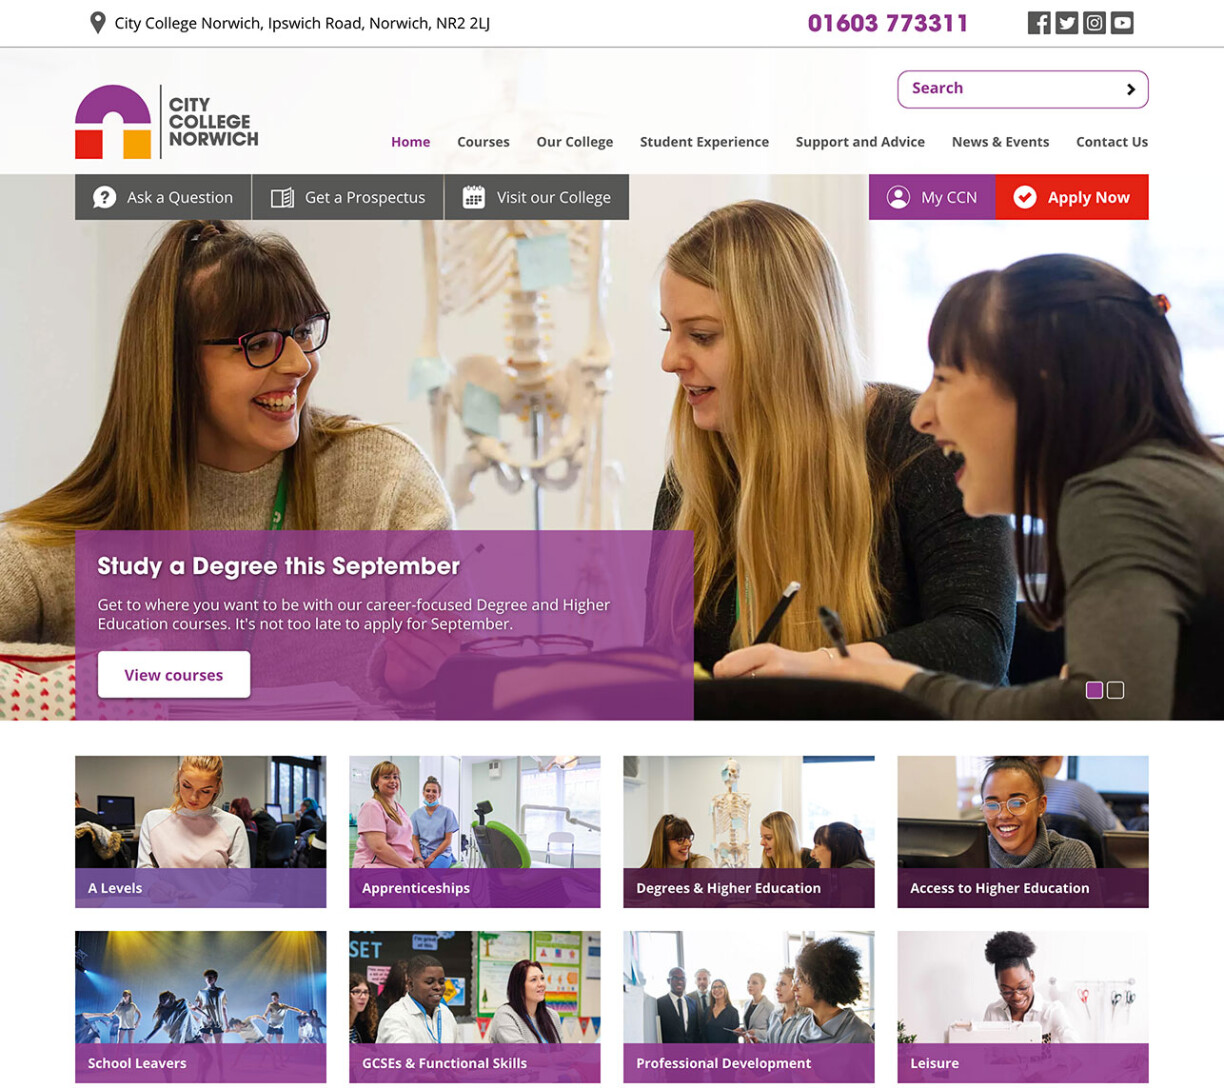 City College Norwich home page